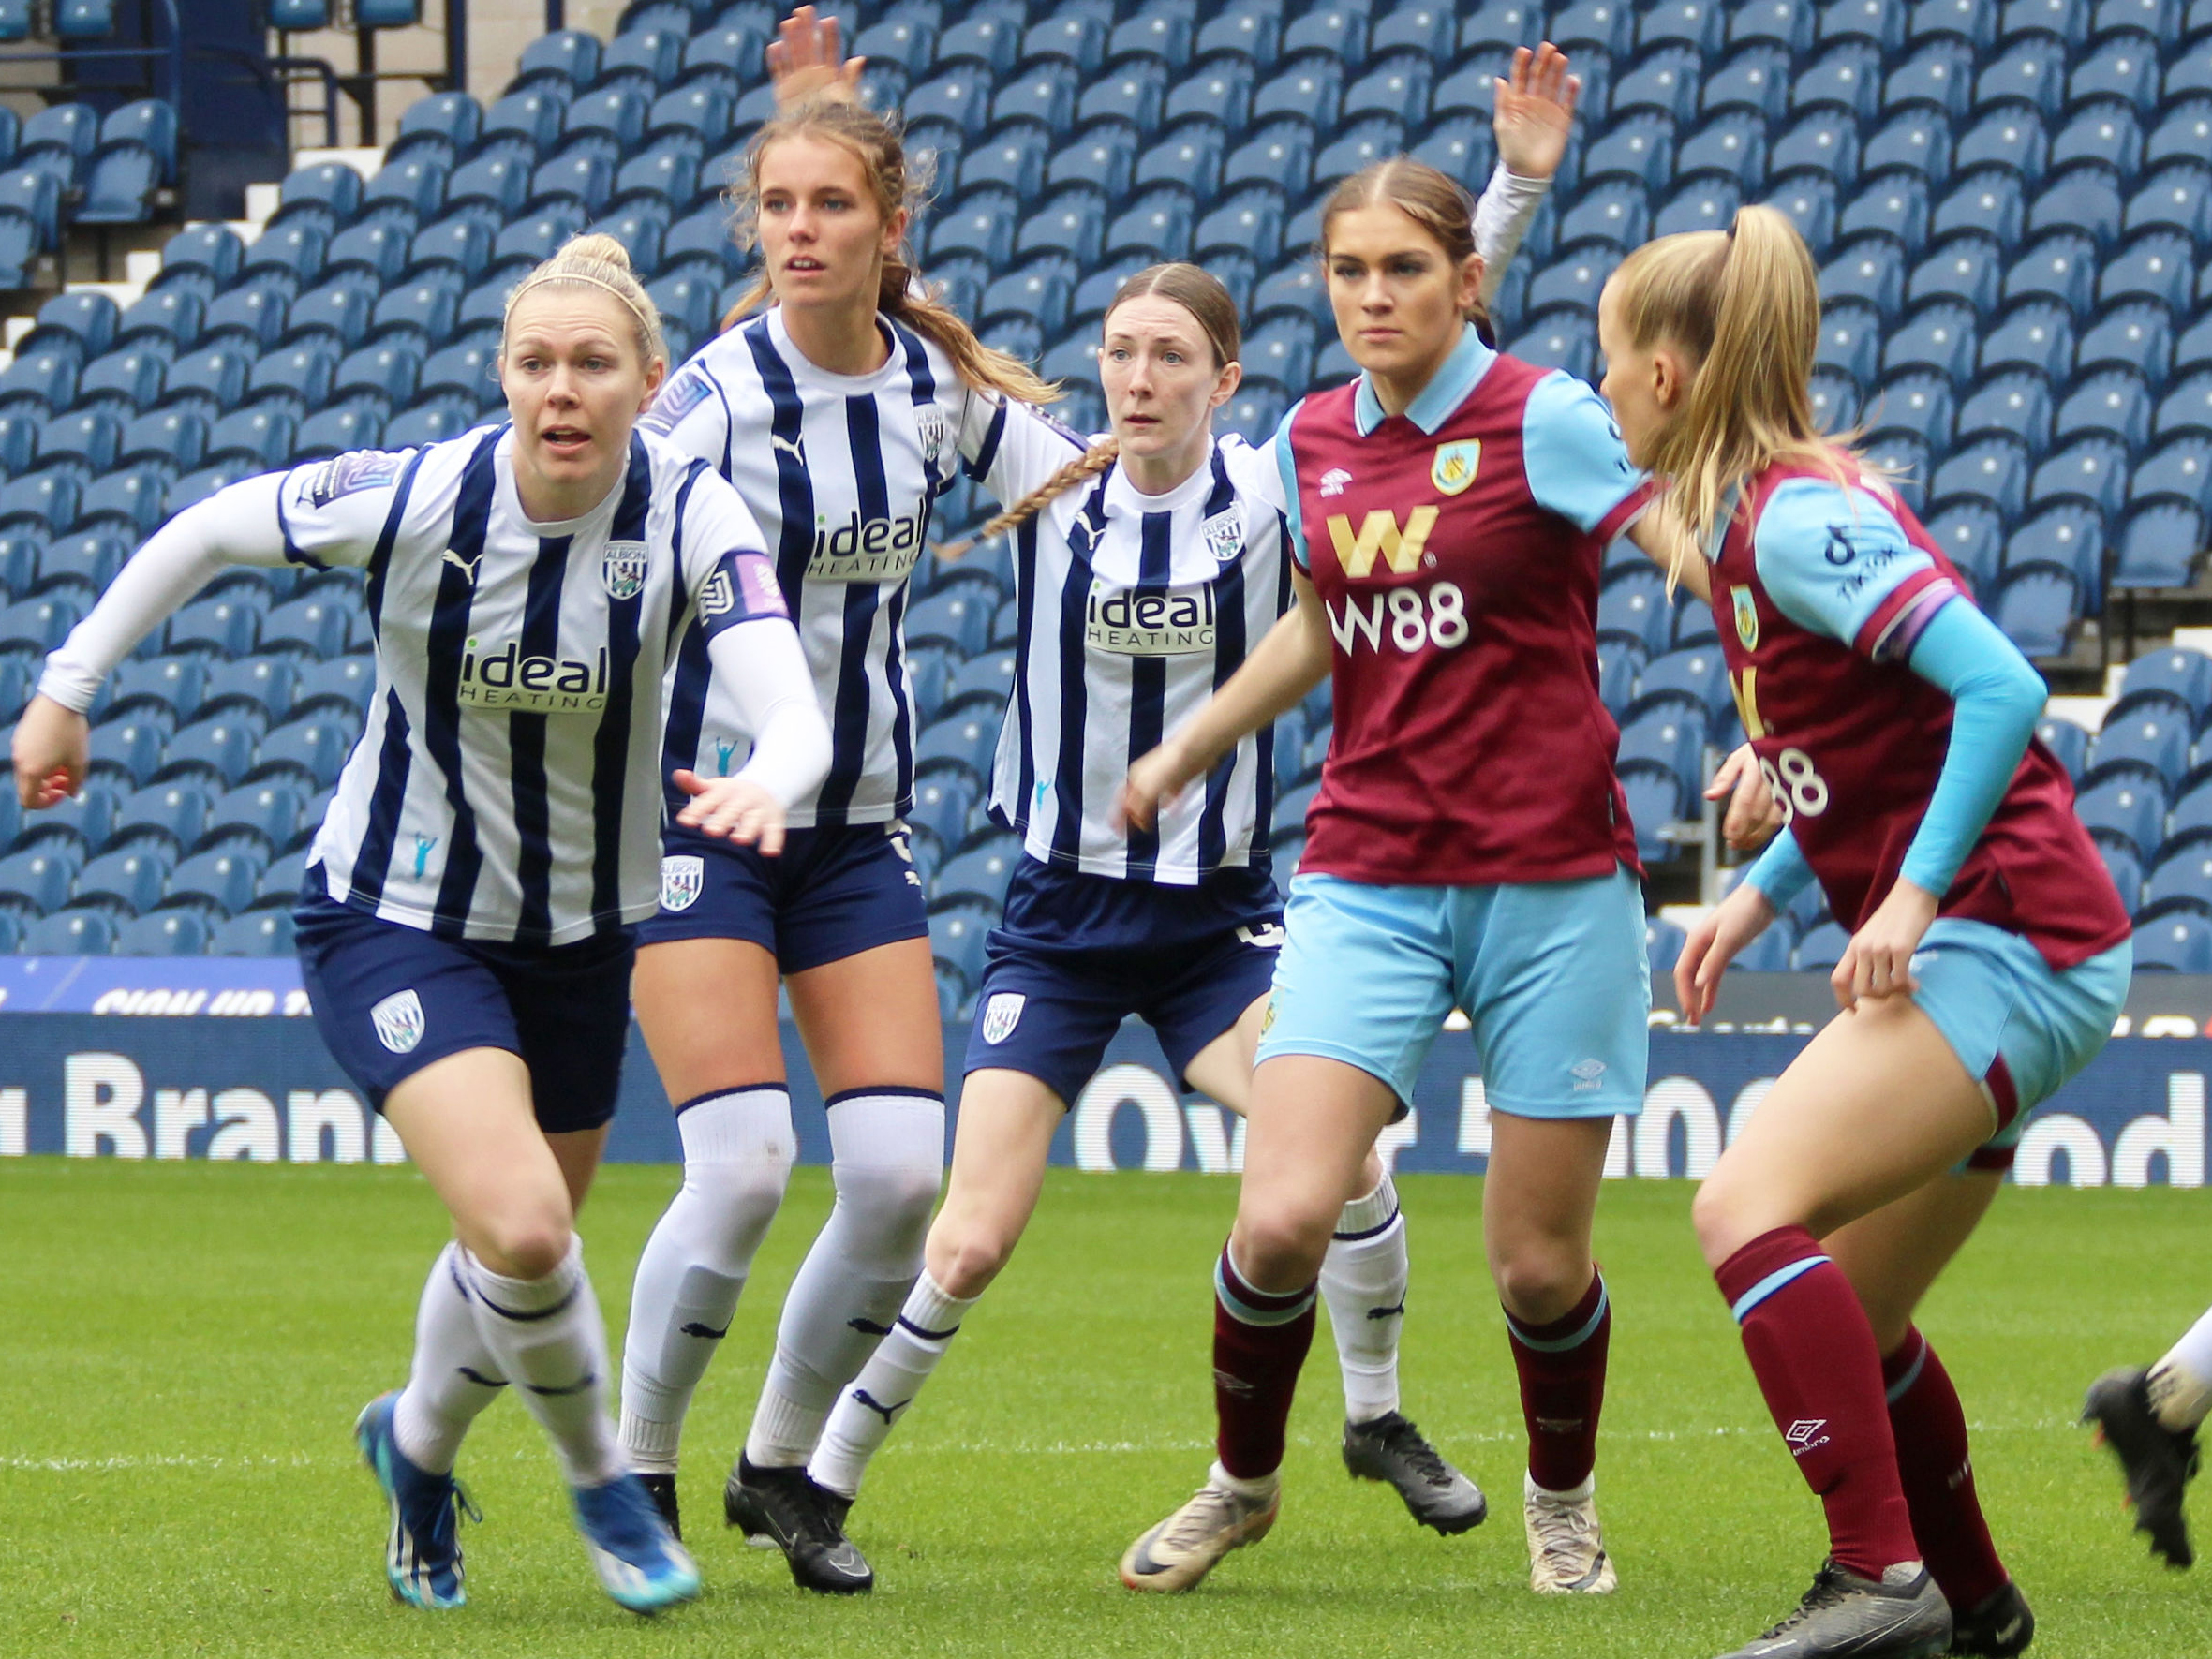 An image of Albion Women players Hannah George, Lucy Newell and Jess Reavill in action against Burnley